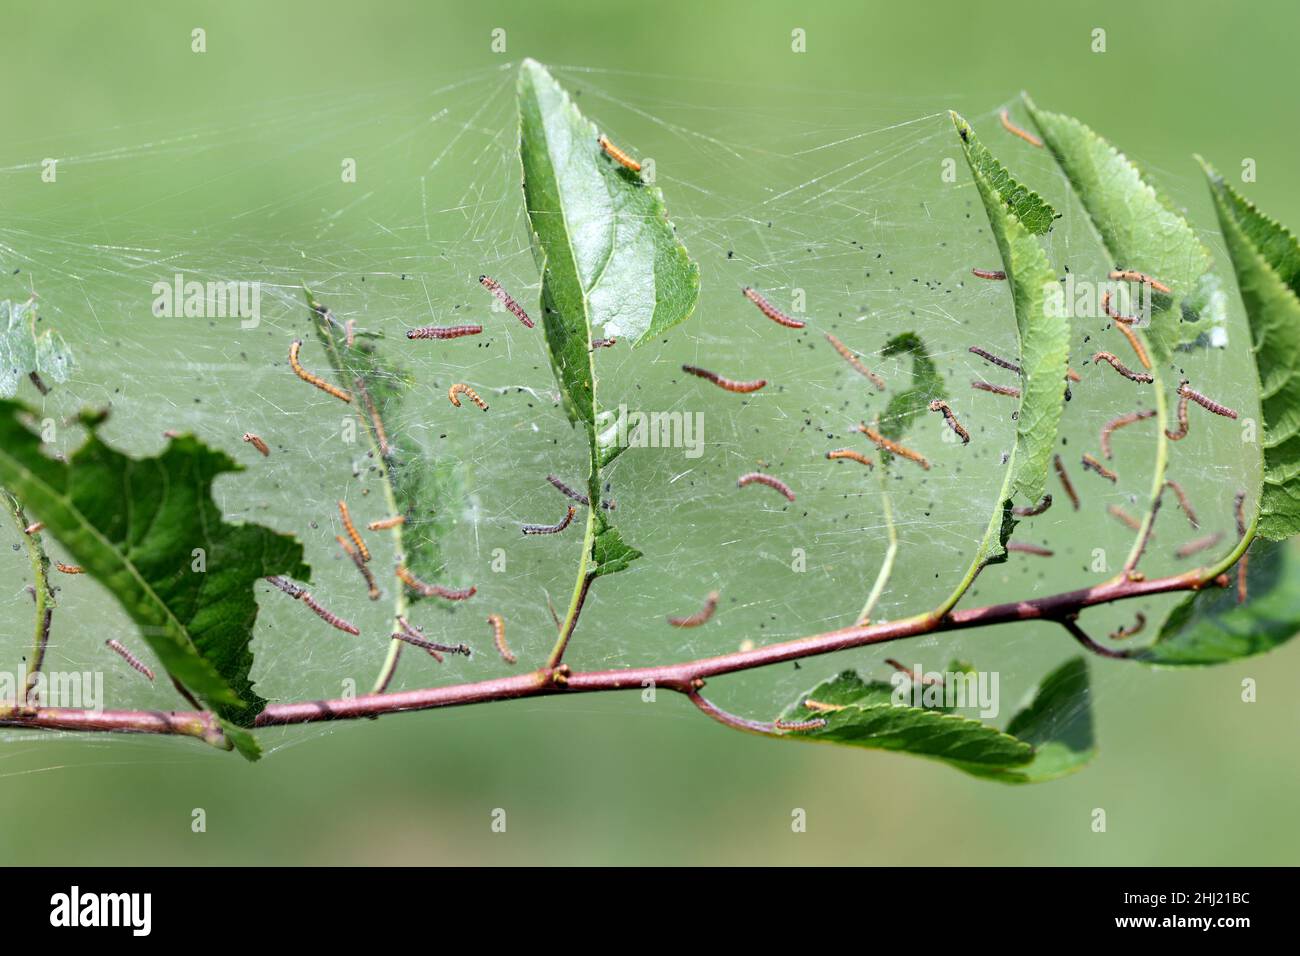 Group of Larvae of Bird-cherry ermine (Yponomeuta evonymella) pupate in tightly packed communal, white web on a tree trunk and branches among green Stock Photo